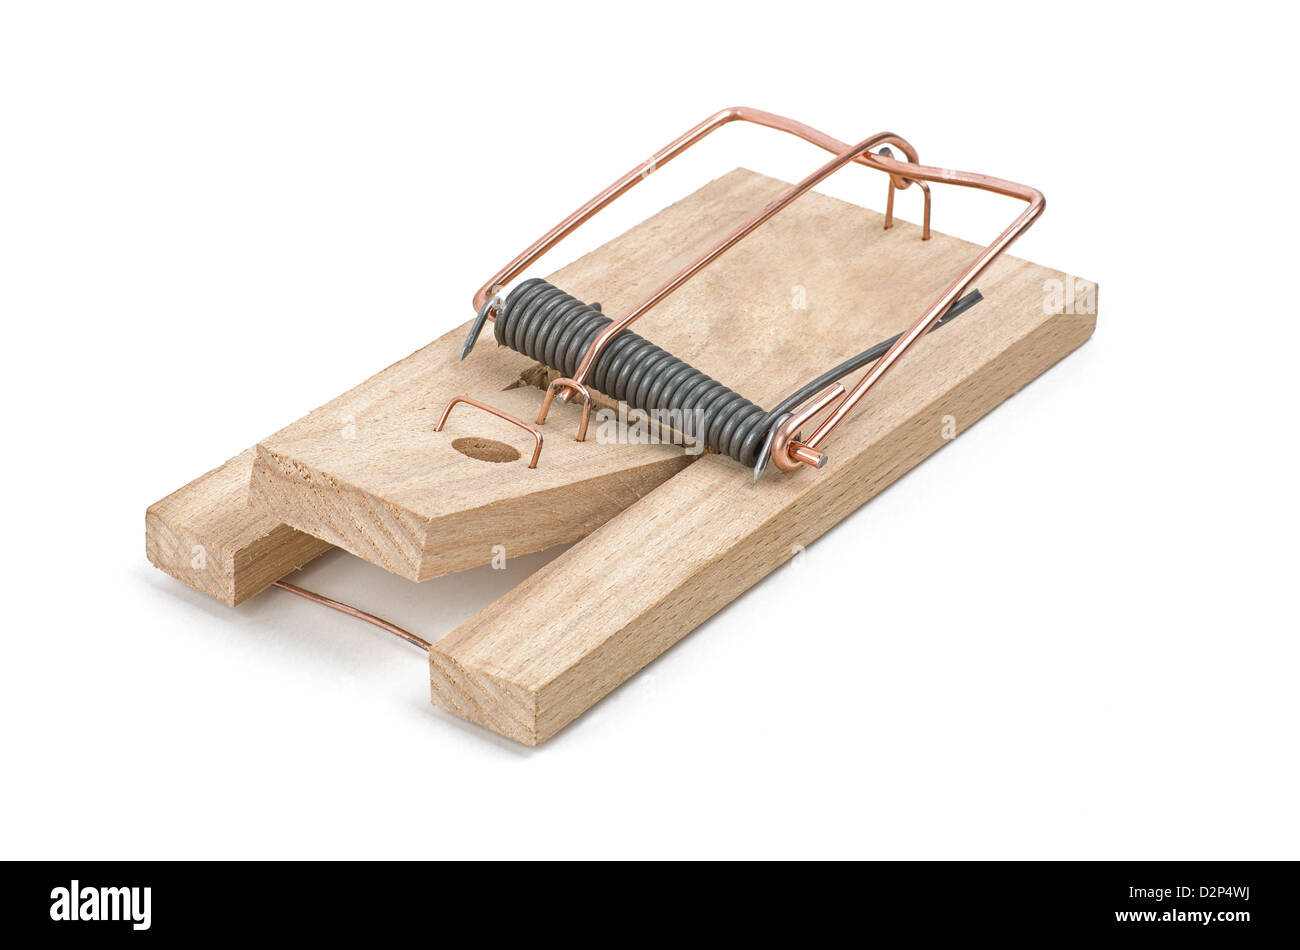 loaded mousetrap Stock Photo